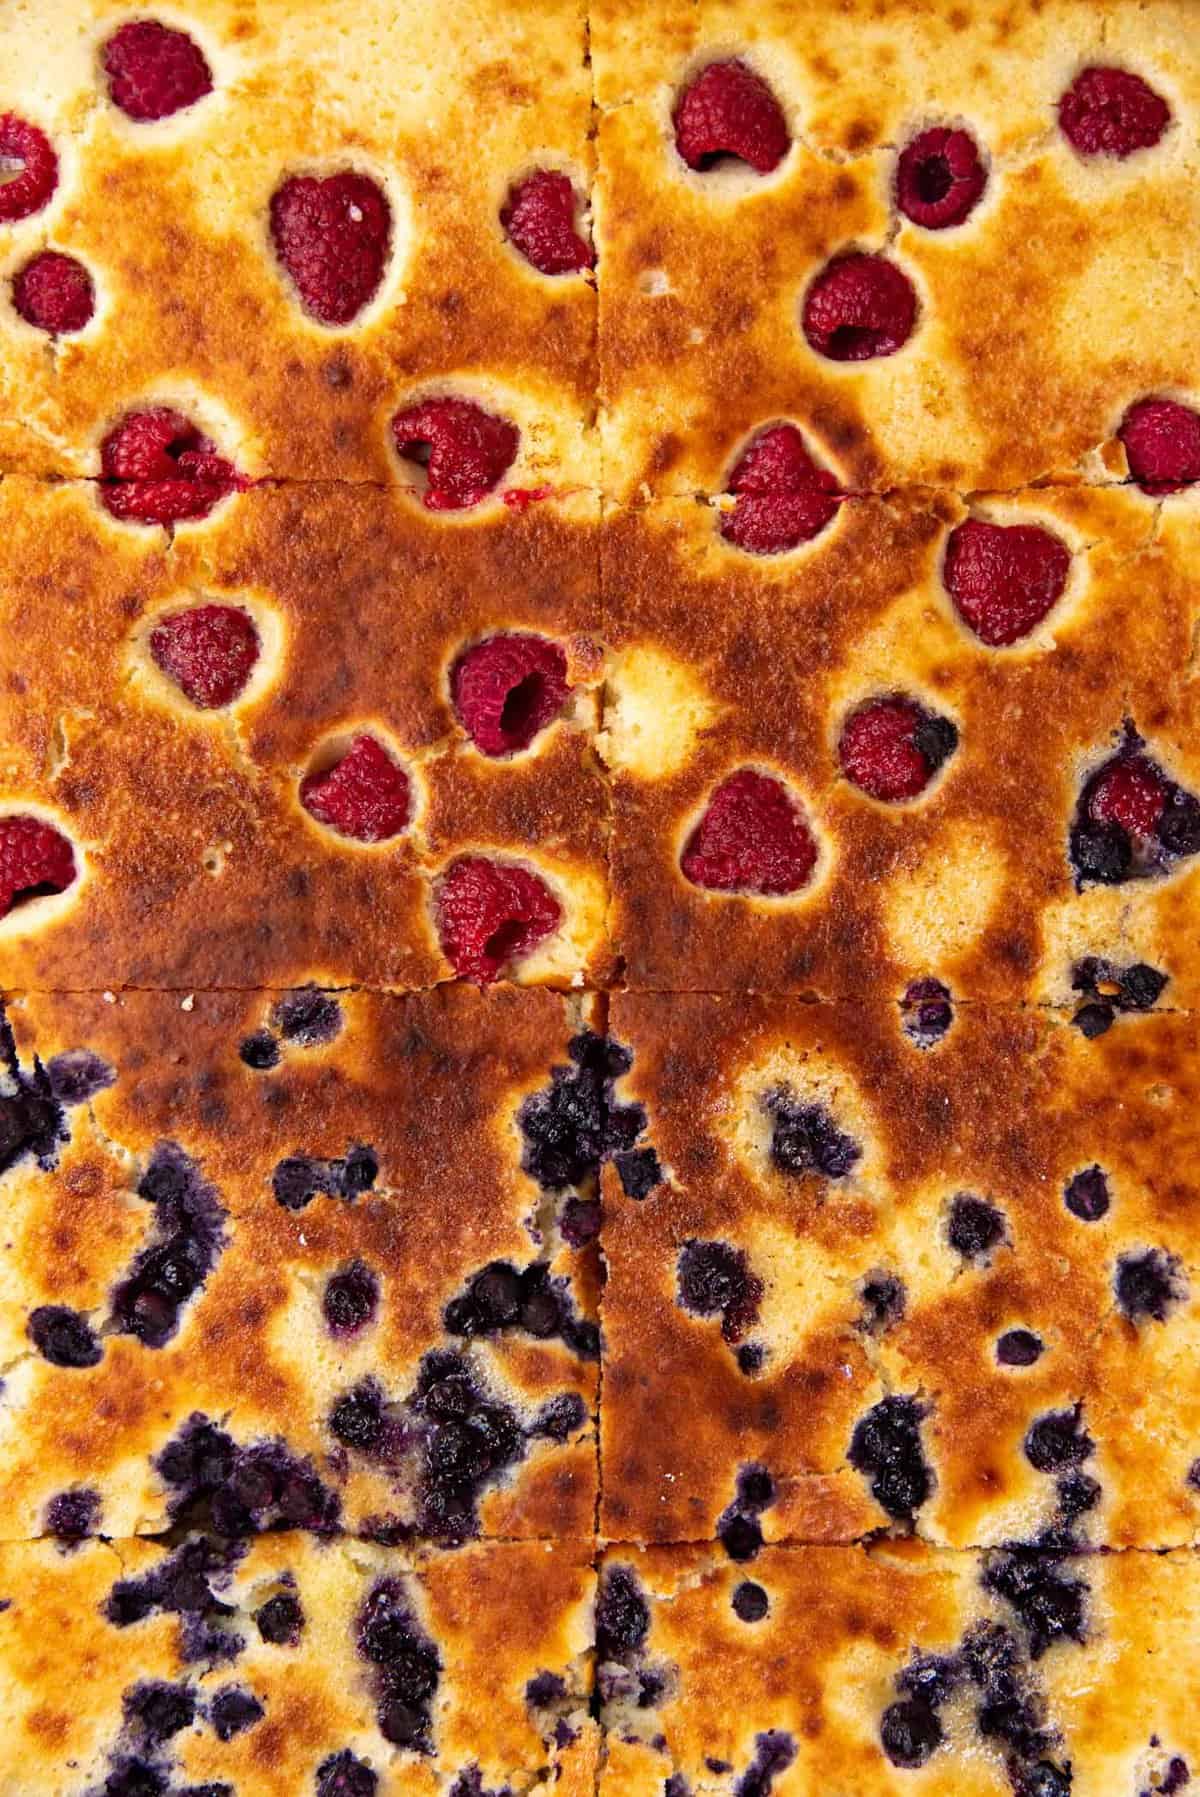 An overhead view close up of the raspberry and blueberry sheetpan pancakes, cut into slices.